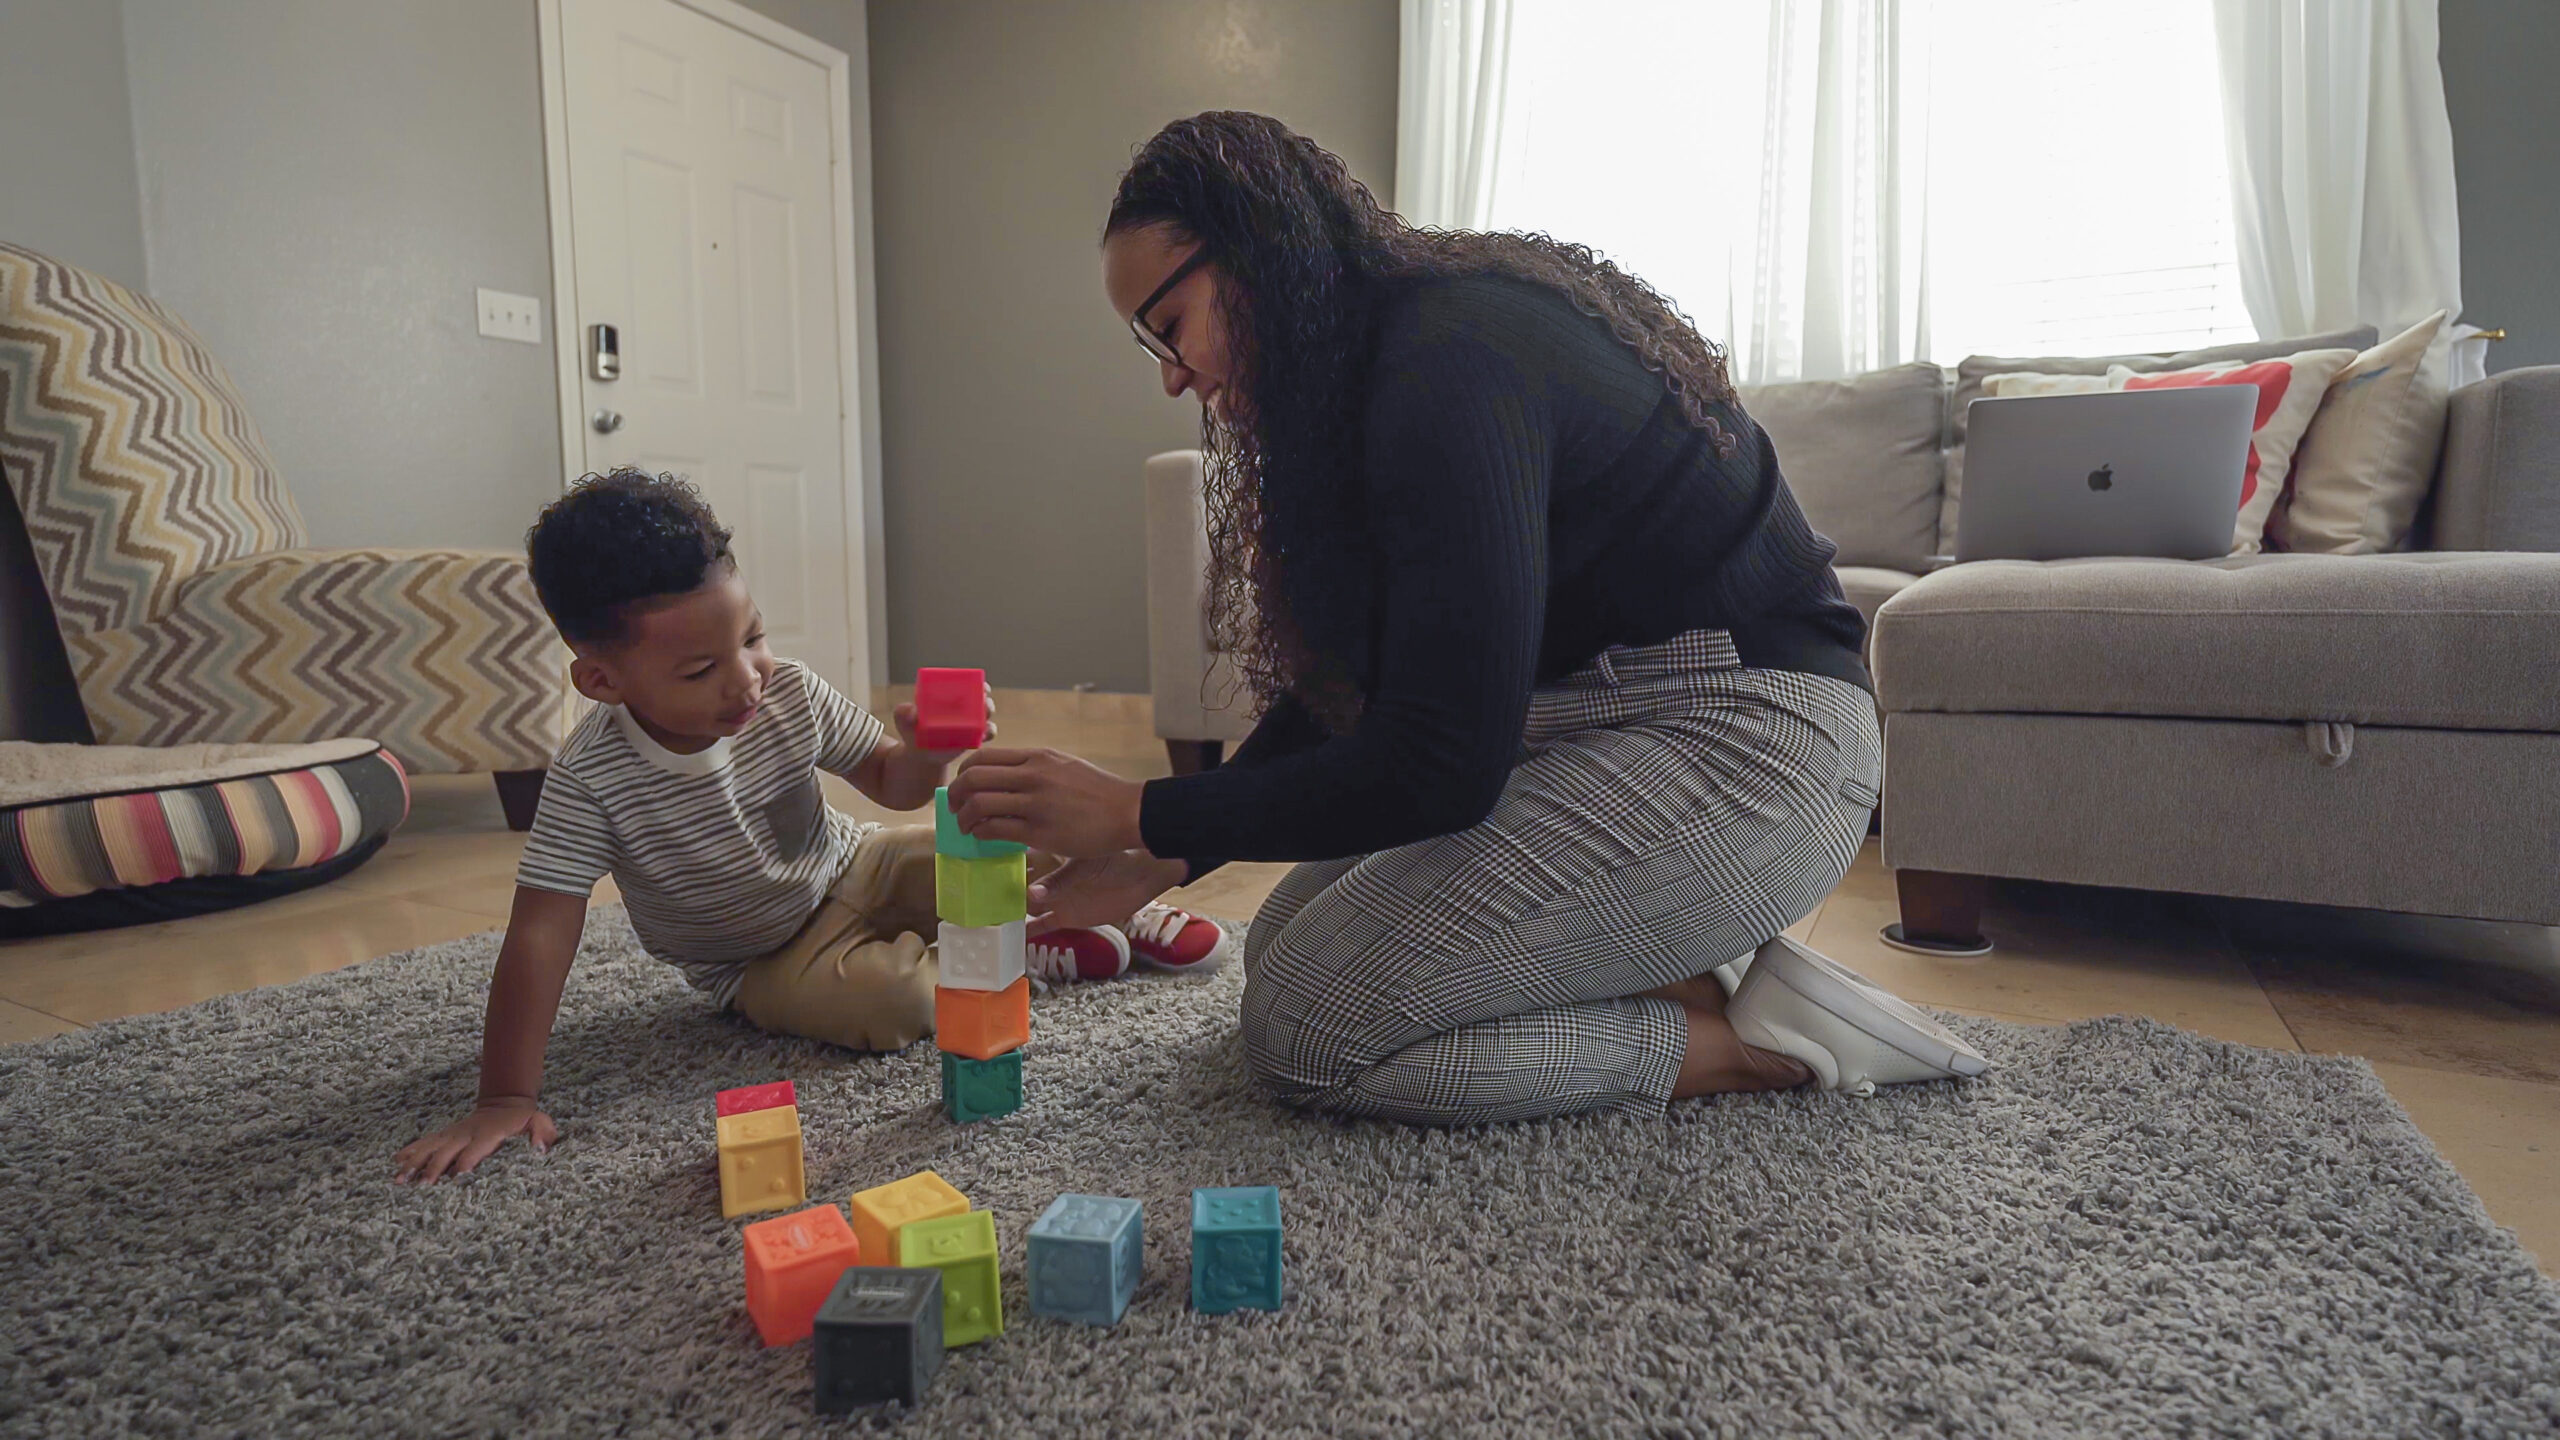 Mom kneeling down on floor playing blocks with son, children learn through play